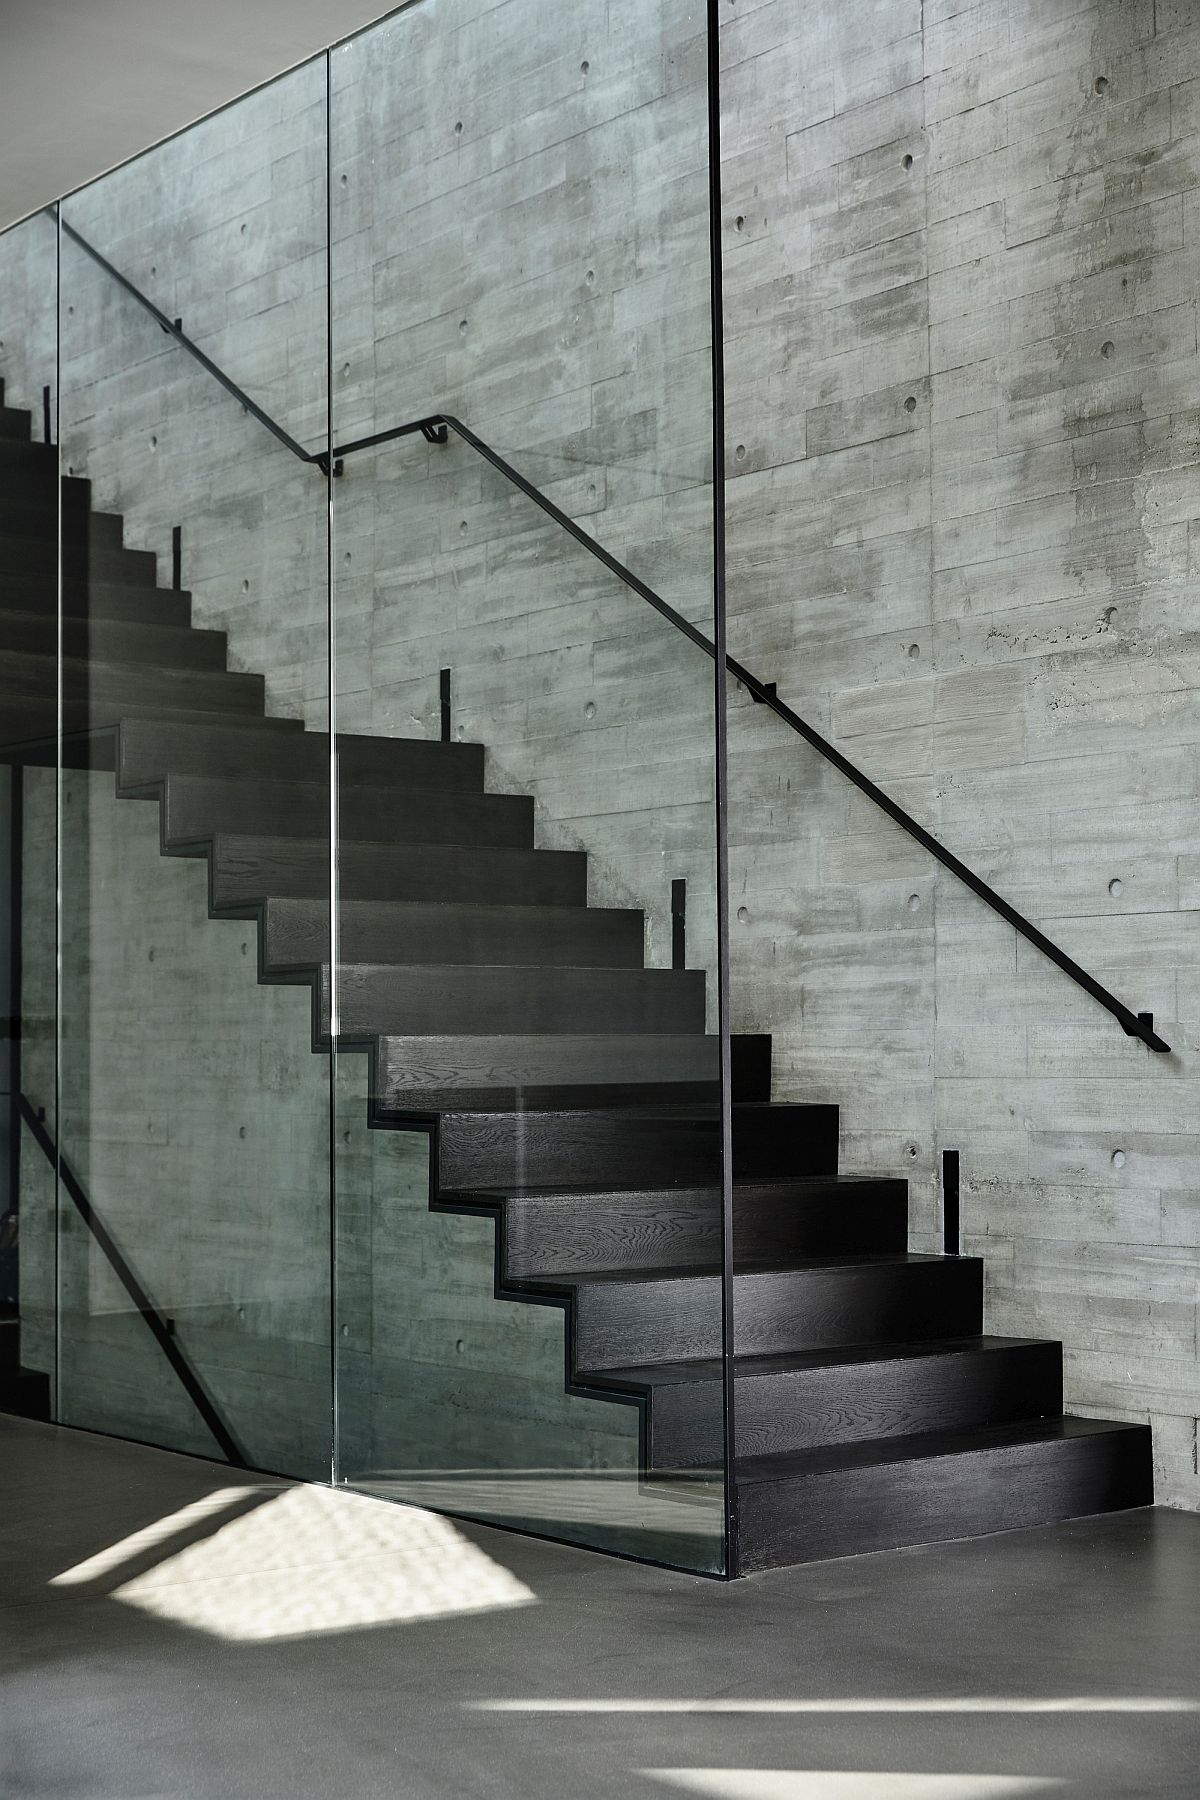 Gray coupled with raw concrete finishes inside the apartment